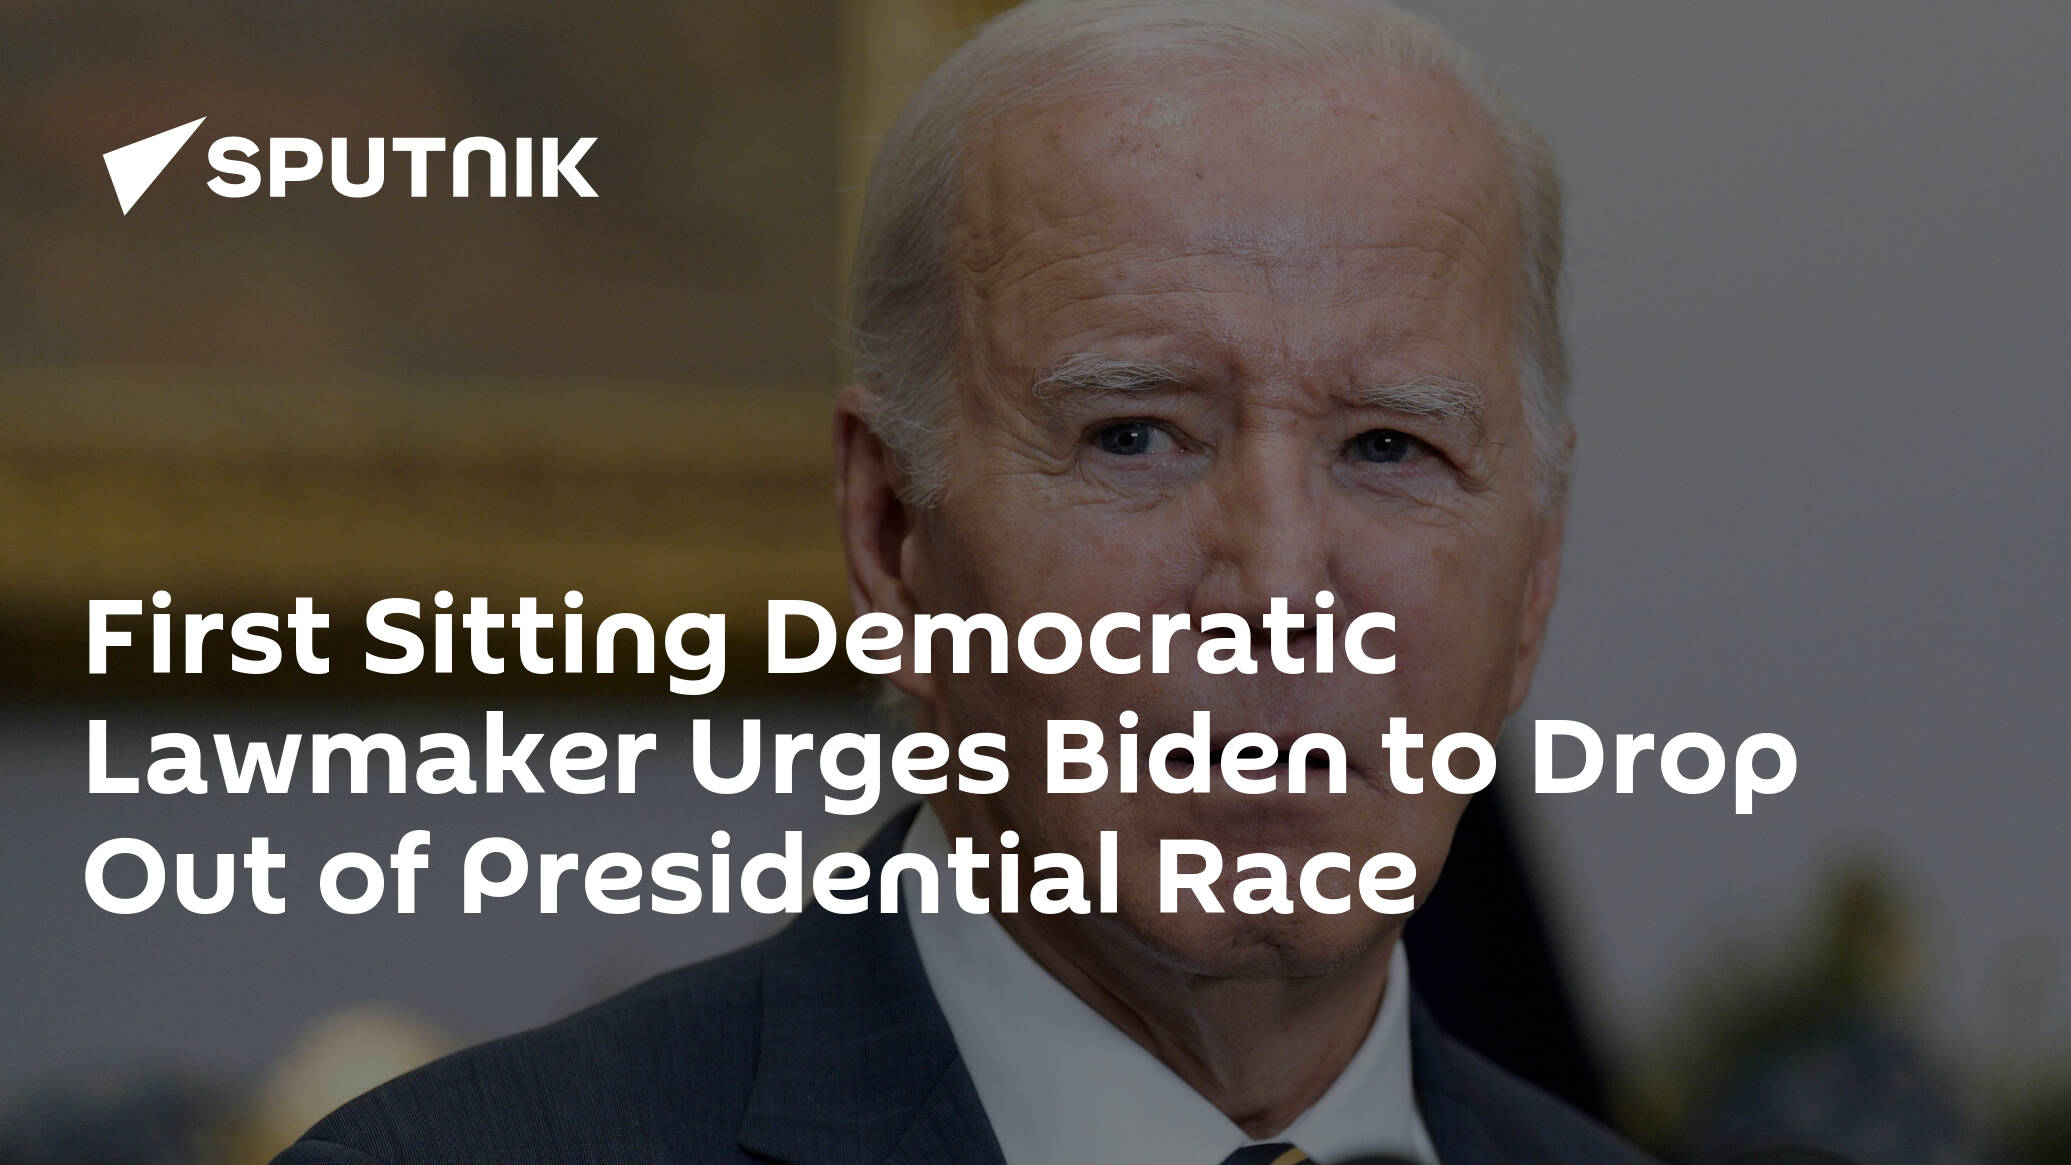 First Sitting Democratic Lawmaker Urges Biden to Drop Out of Presidential Race